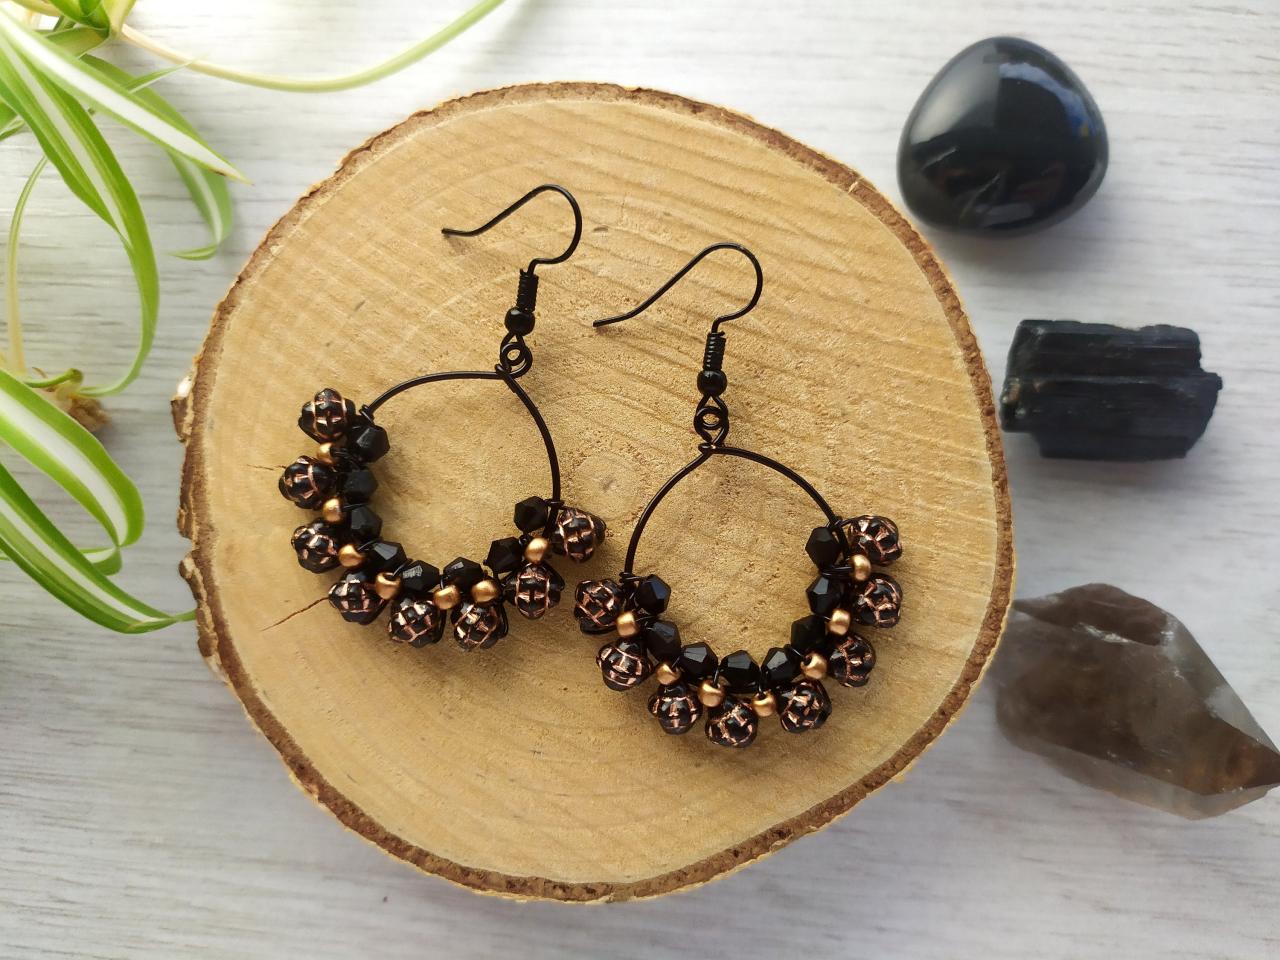 Black And Copper Bubbly Hoops, Wire Wrapped Black Copper Earrings, Black Dainty Boho Earrings, Bohemian Jewelry, Statement Earrings